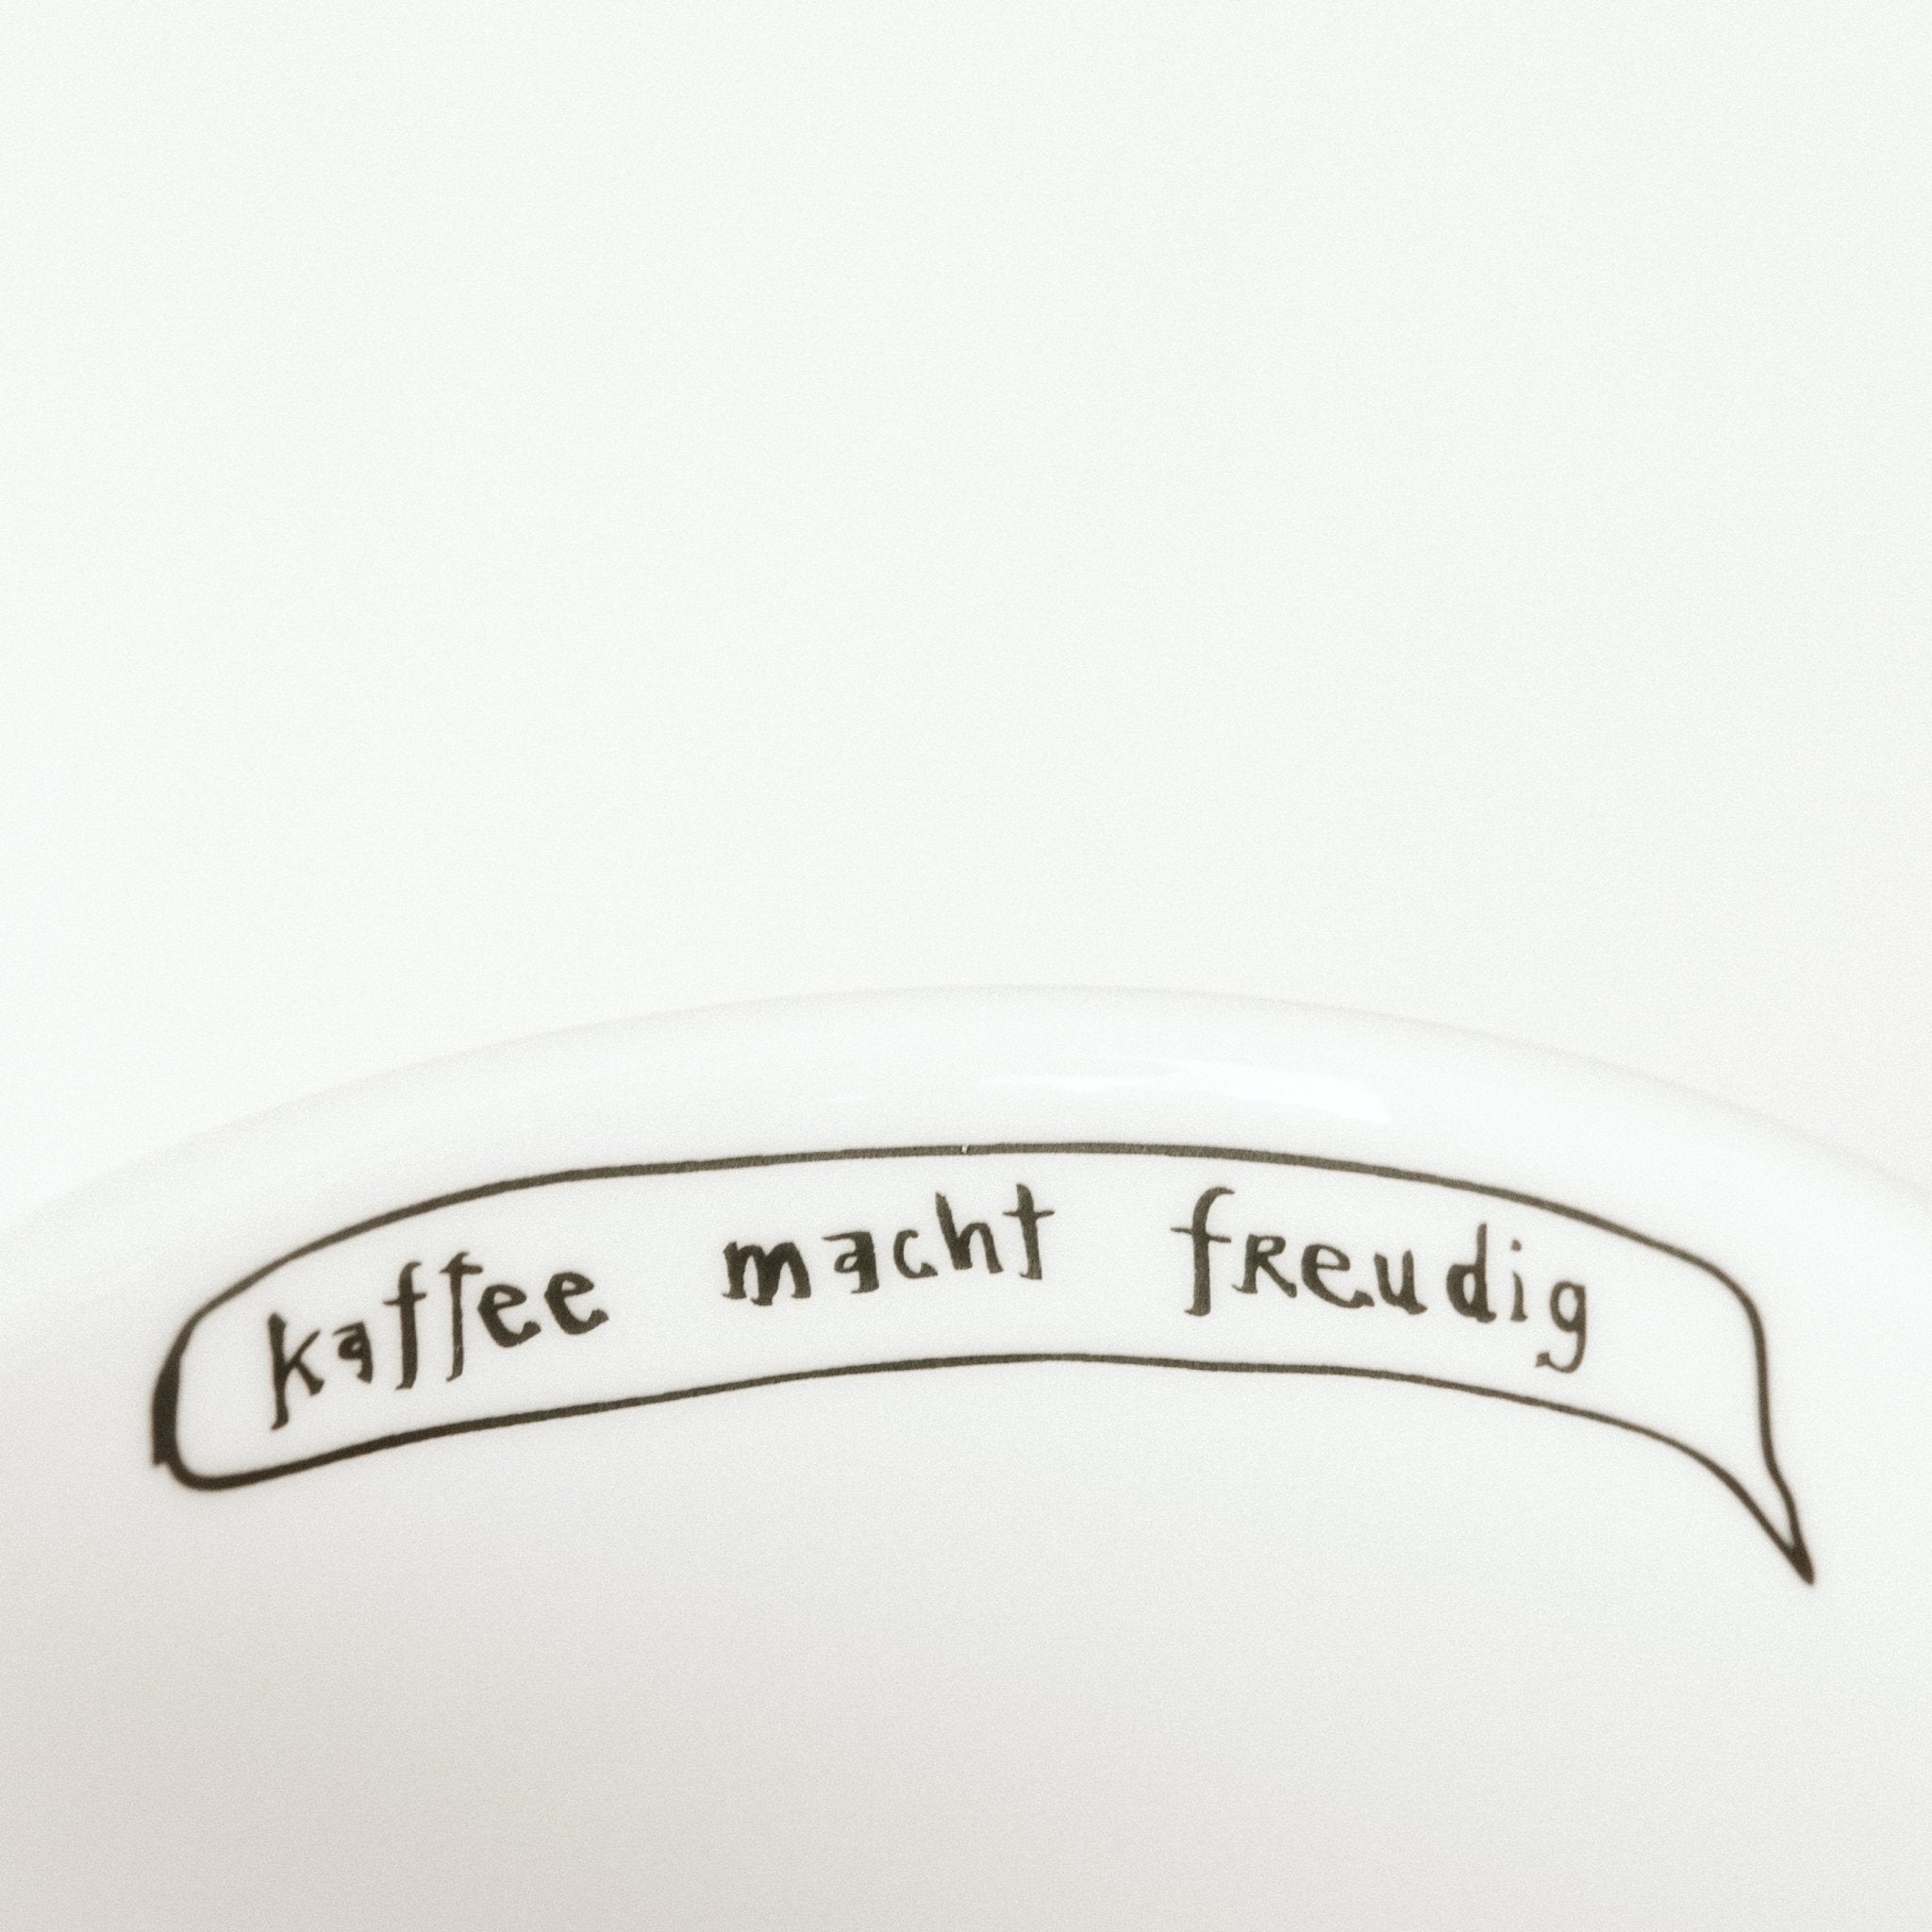 Porcelain cup inspired by Sigmund Freud text inside of the cup